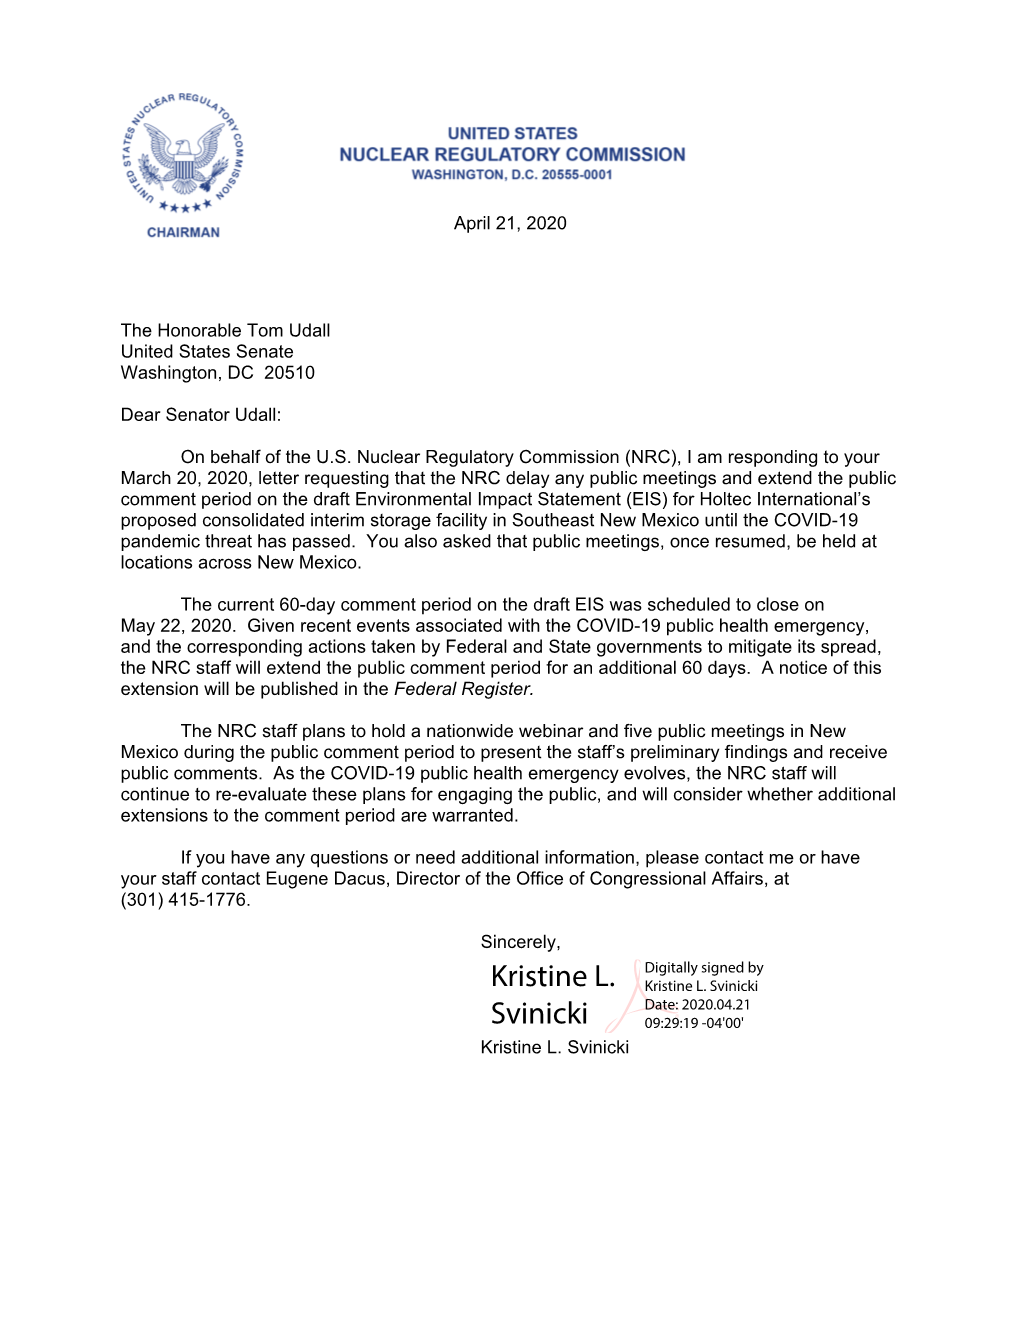 Letter to the Honorable Tom Udall, Et